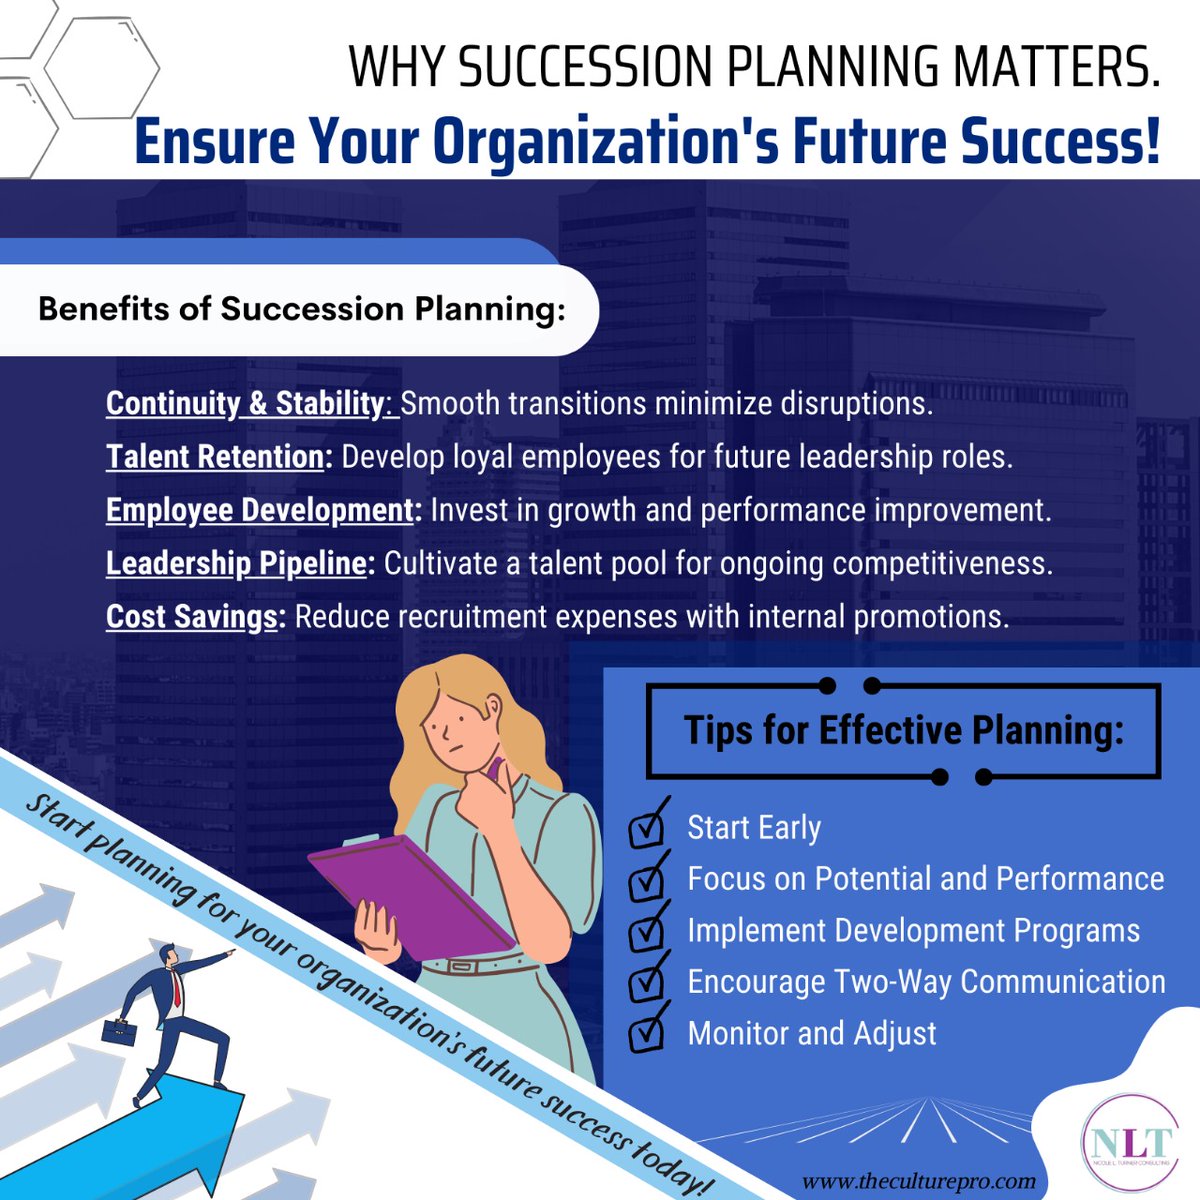 Succession planning is a critical aspect of organizational management that plays a pivotal role in ensuring continuity, growth, and sustained success. 
#successionplanning #organizationalefficiency #leadership #futureofwork #theculturepro #management